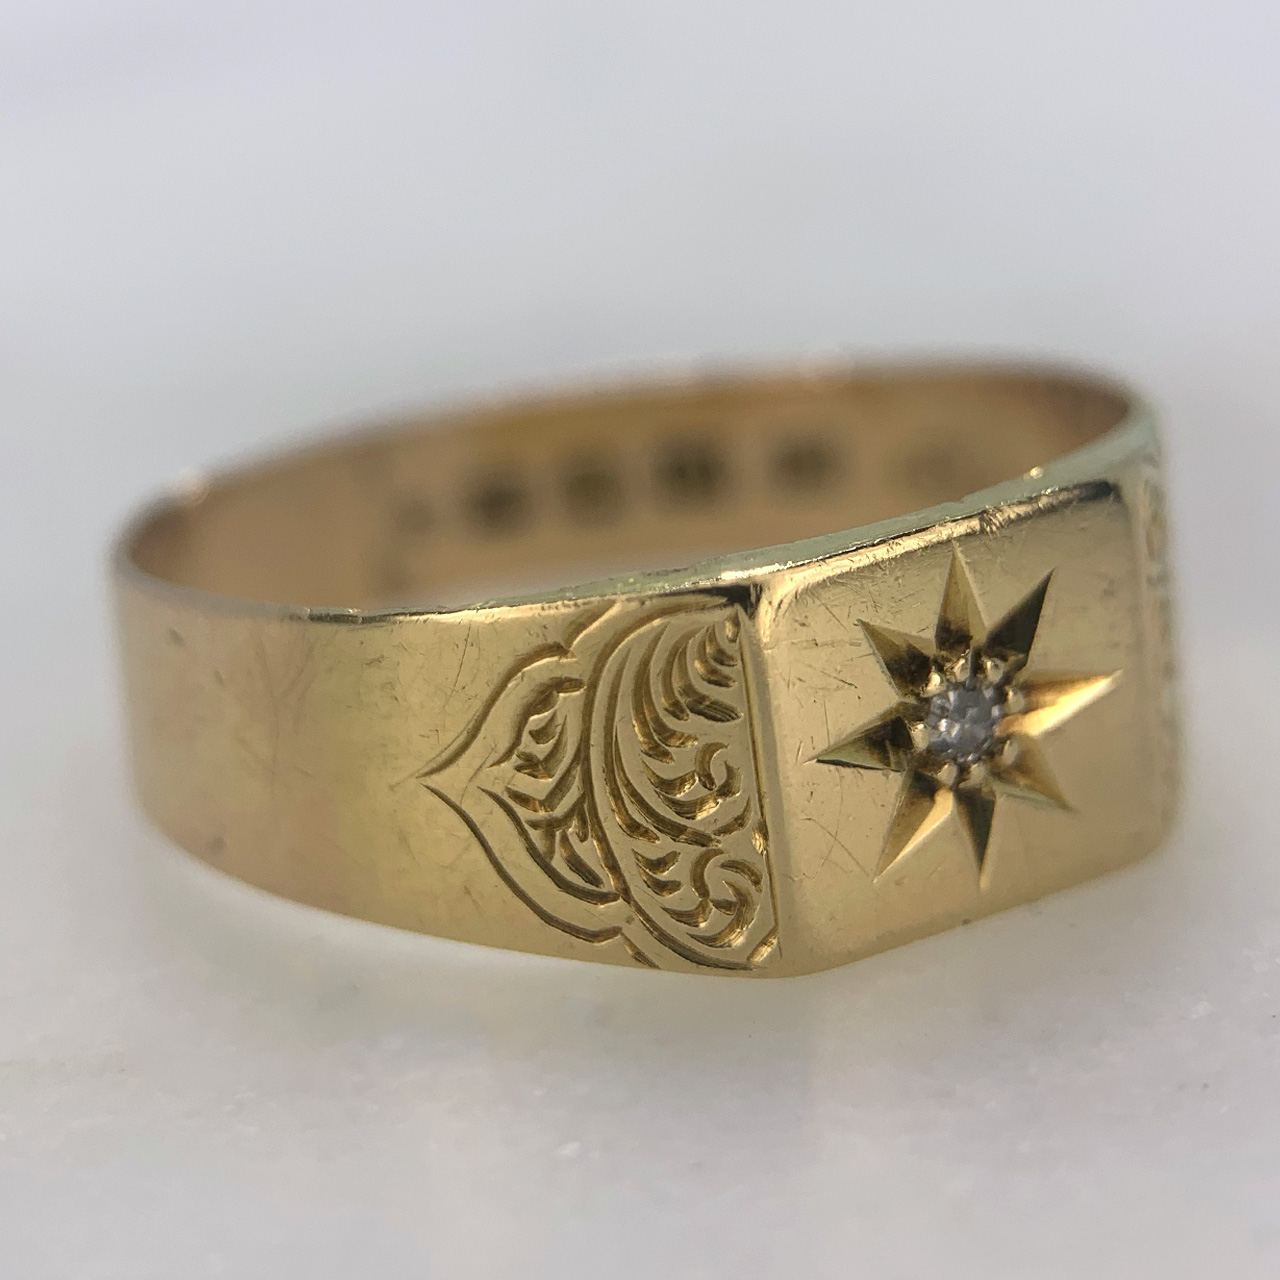 Fabulous Antique Star Set Diamond Signet Ring in 18ct yellow Gold, Hallmarked London (1865). The 1.5 mm diameter diamond is star set in a rectangular top measuring approximately 8 mm x 9 mm. The shoulders are engraved with intricate swirling the rest of the shank is polished. In excellent condition for its age, with minor wear marks. 